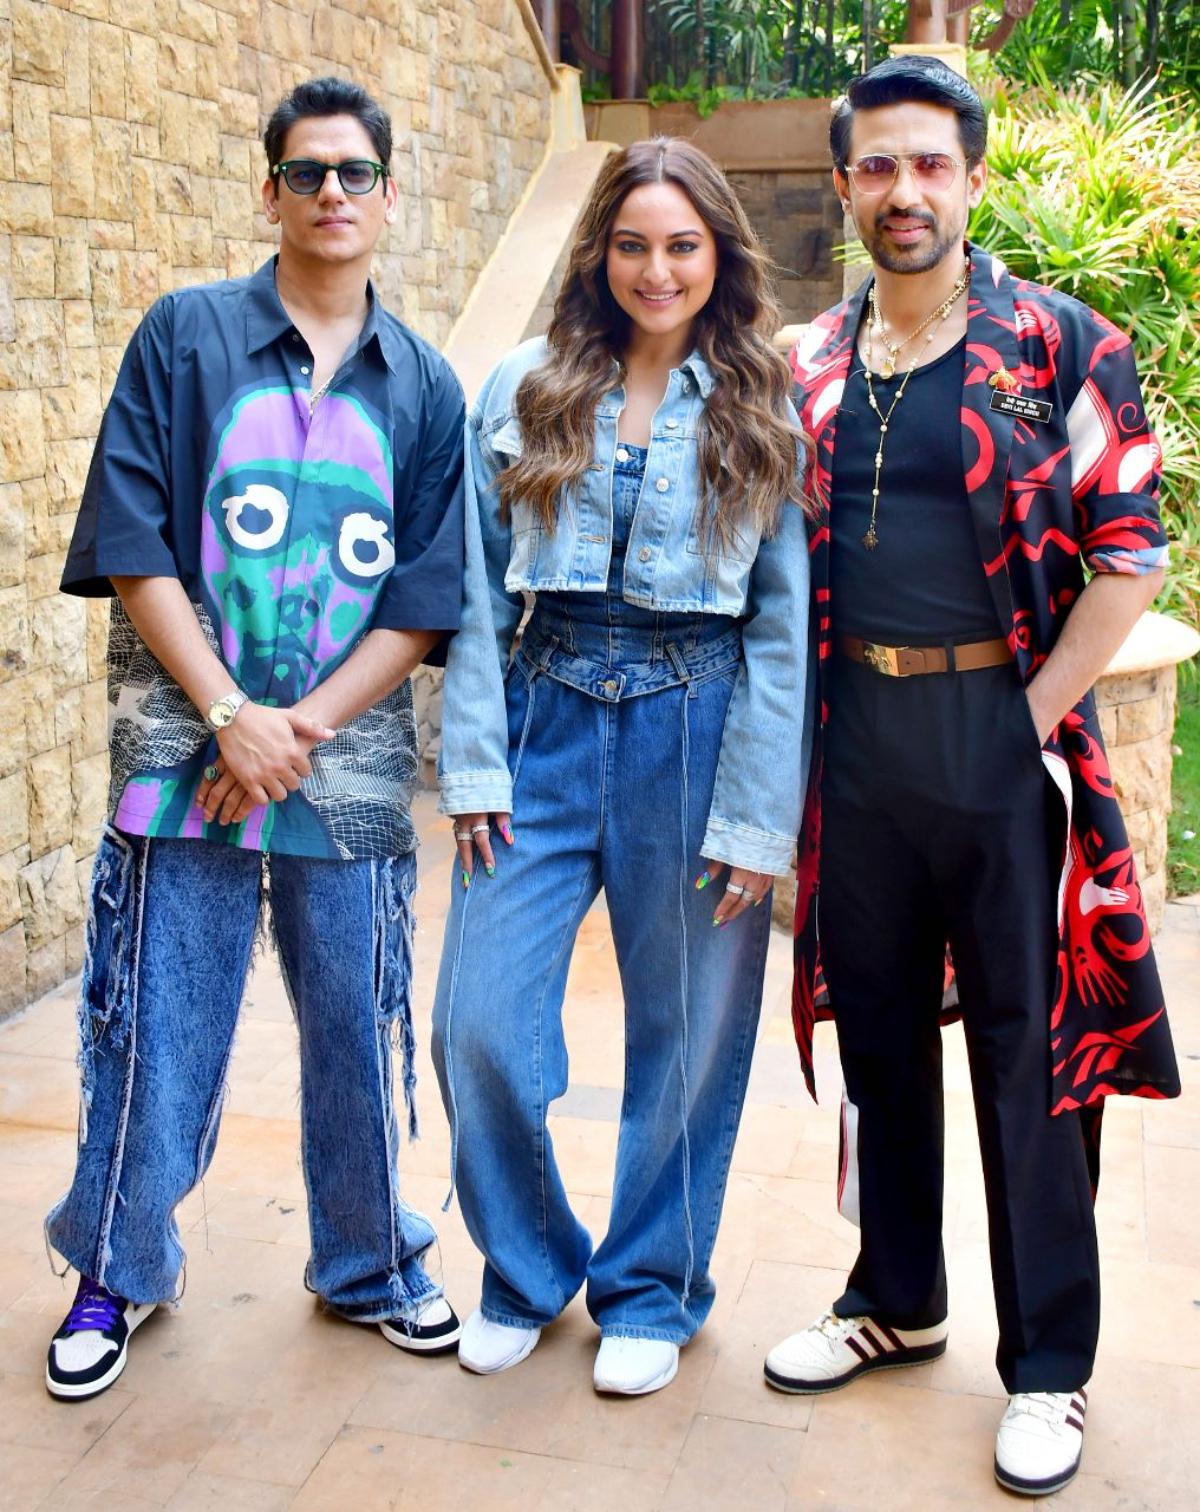 Sonakshi, Vijay and Gulshan, who are set to enthral the audiences with their power-packed performances in 'Dahaad', looked picture-perfect as they posed together for photos. 